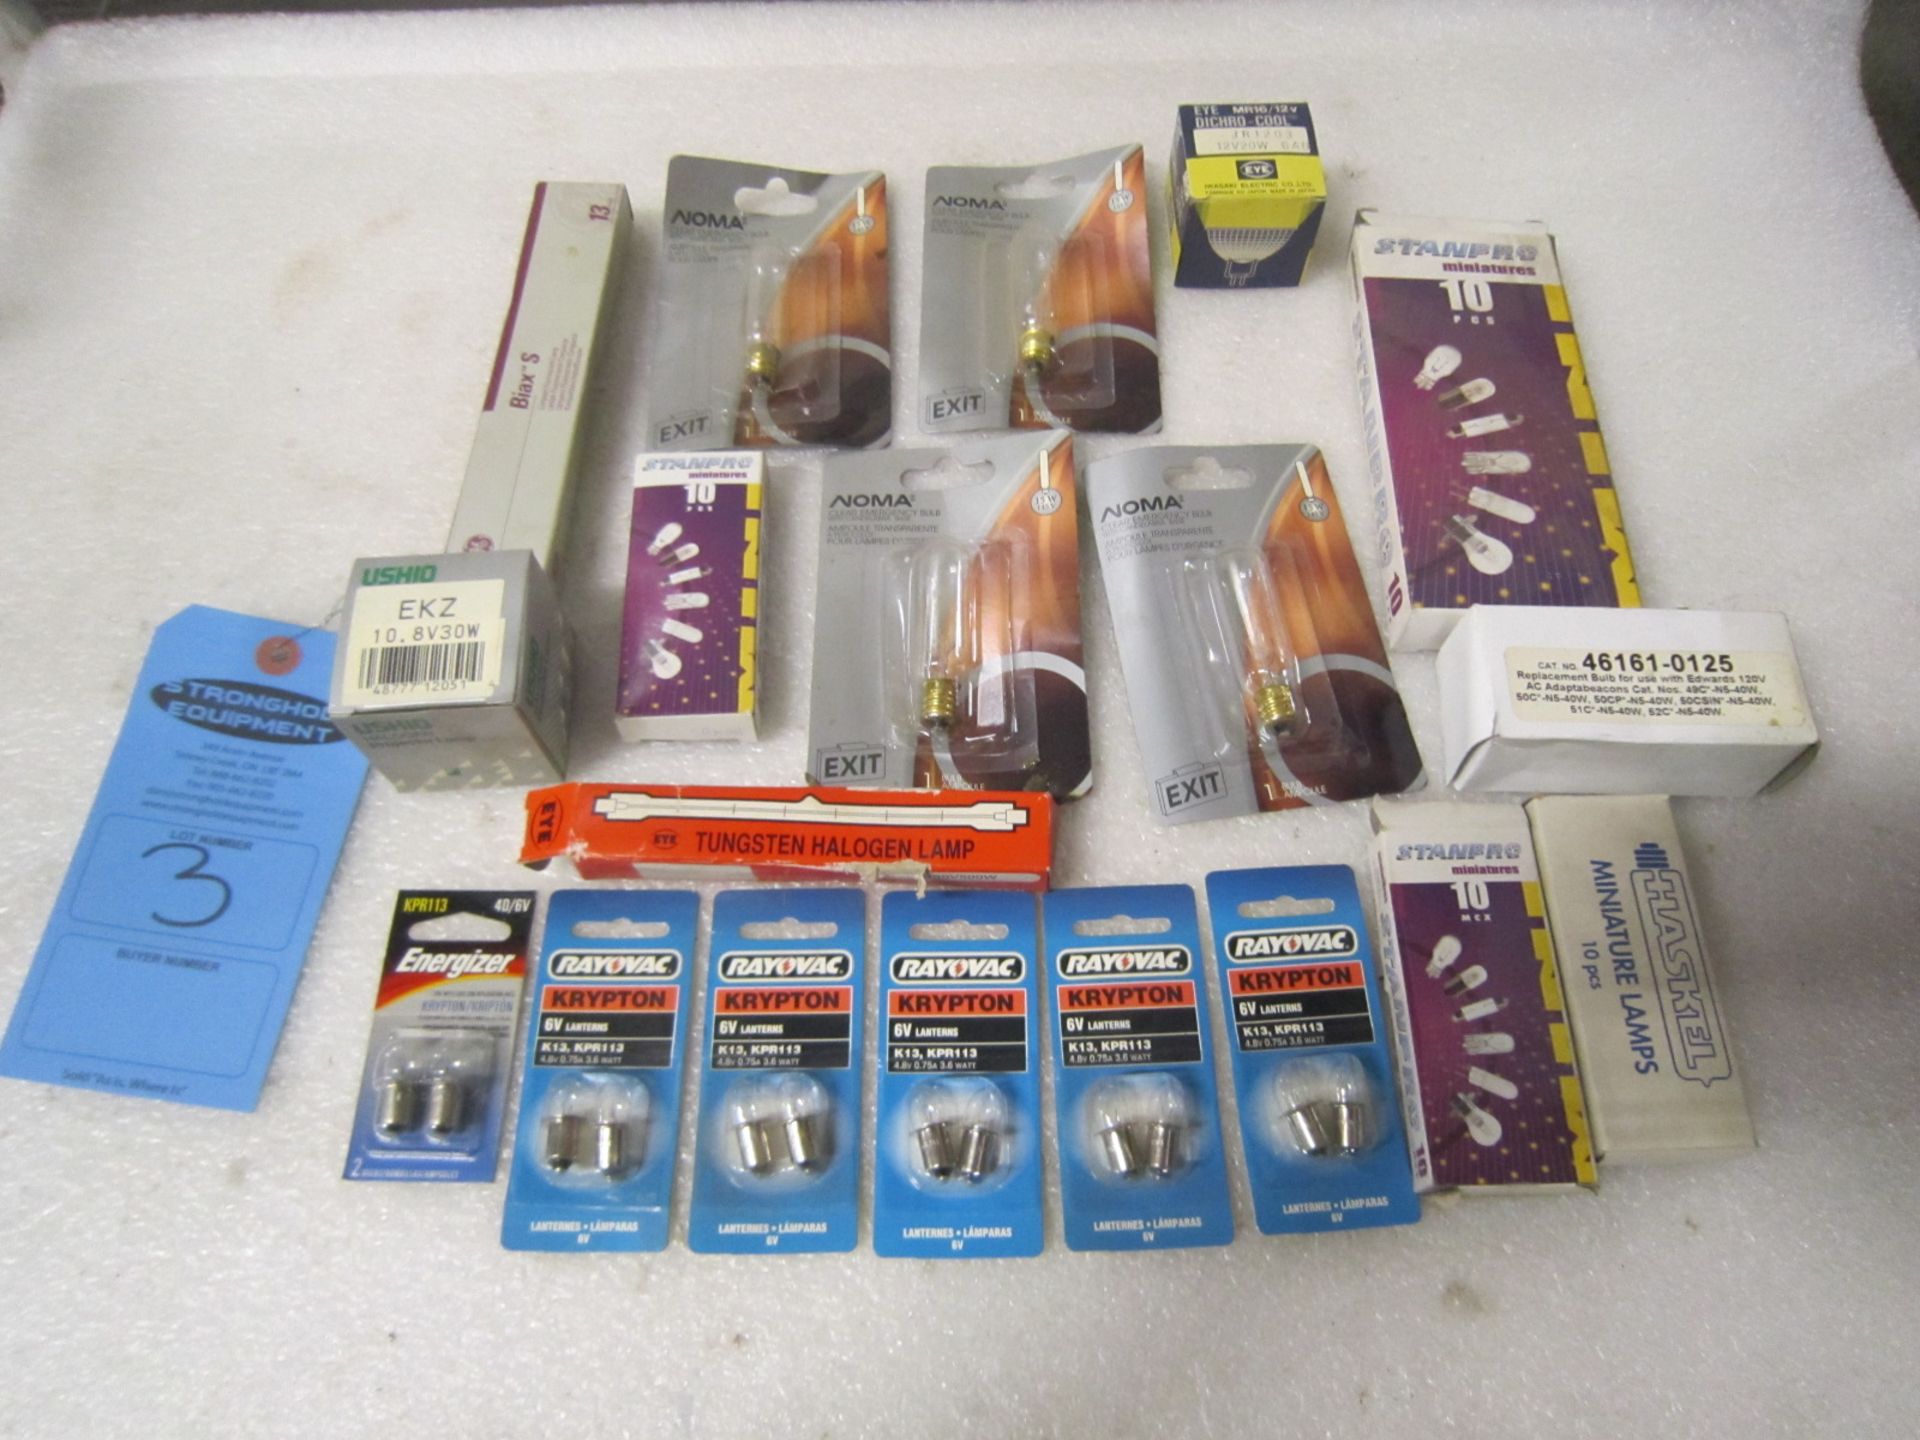 Lot of assorted light bulbs - over 20 units new in boxes